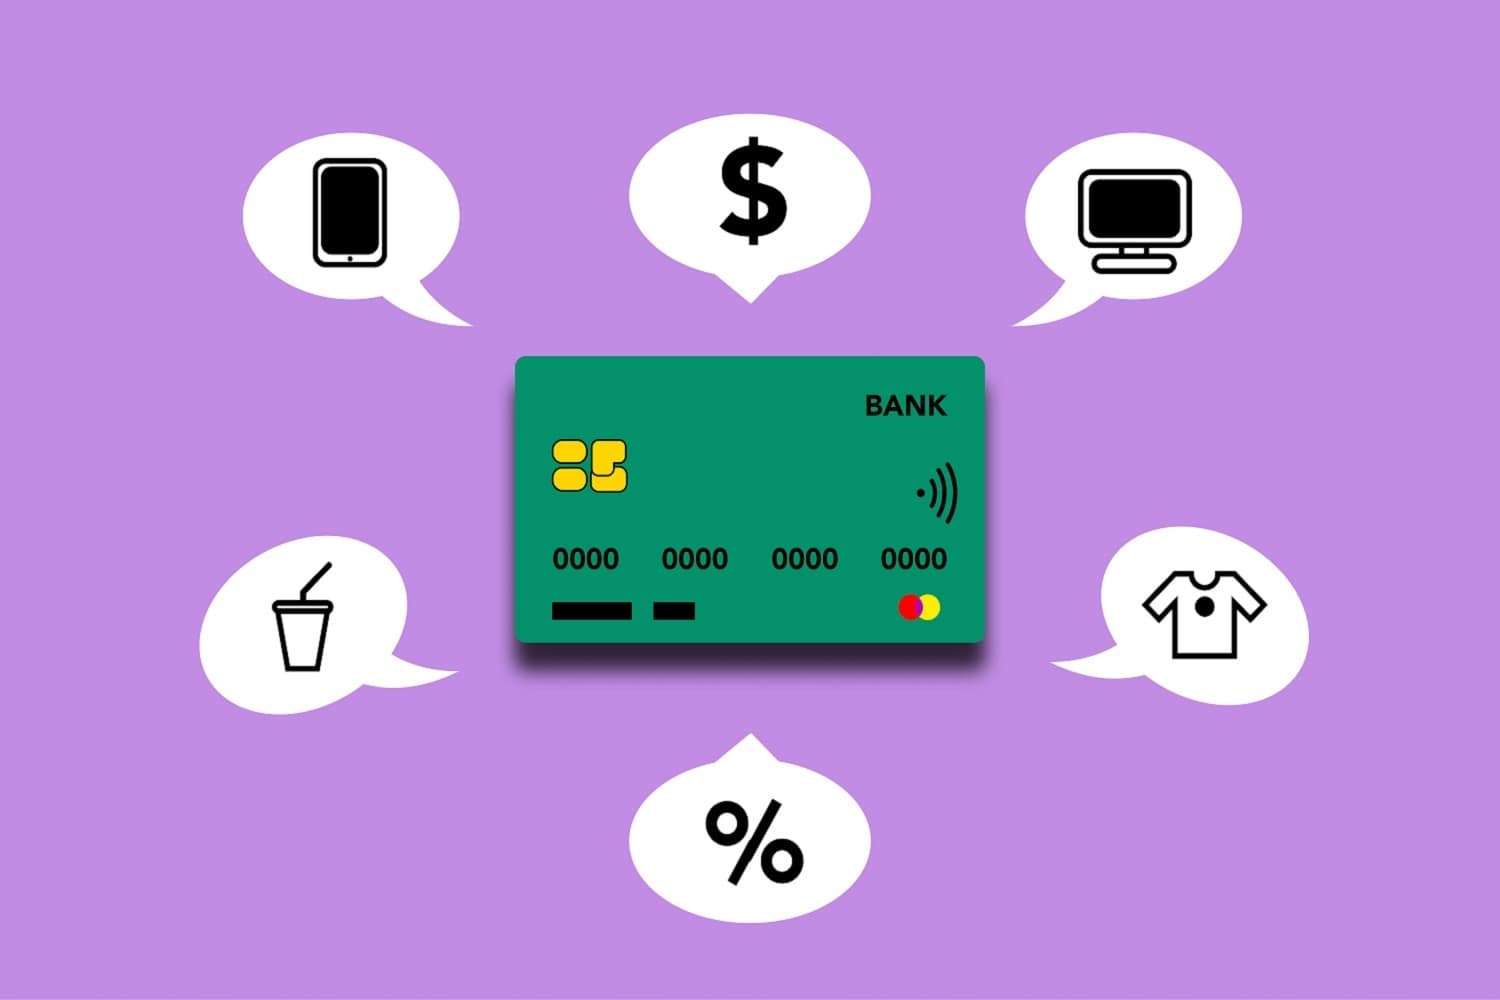 An illustration of a credit card with icons depicting spending on Amazon overheads.